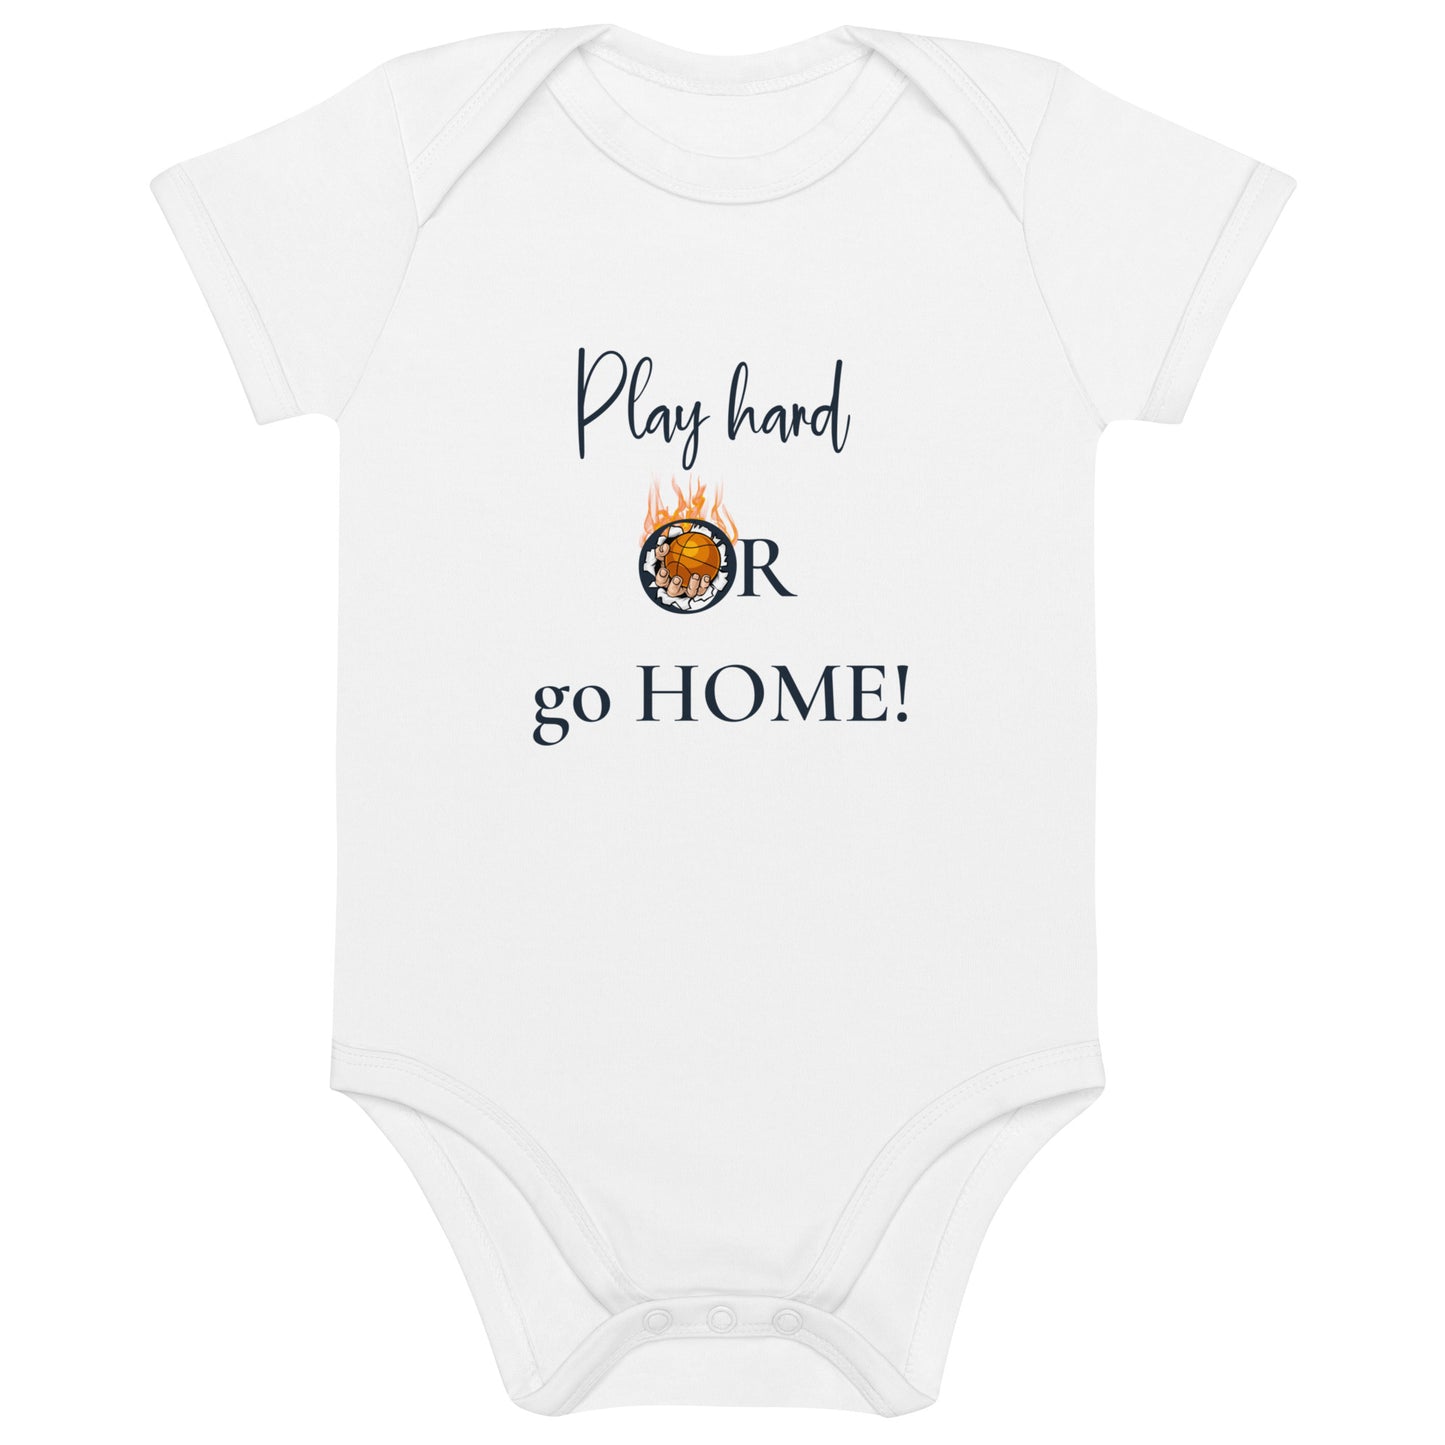 Organic cotton baby bodysuit | Future Baller Basketball Baby Onesie®, Basketball Shirt for Toddler, Sports Themed Baby Shower Gift, Basketball Outfit, cute baby bodysuit